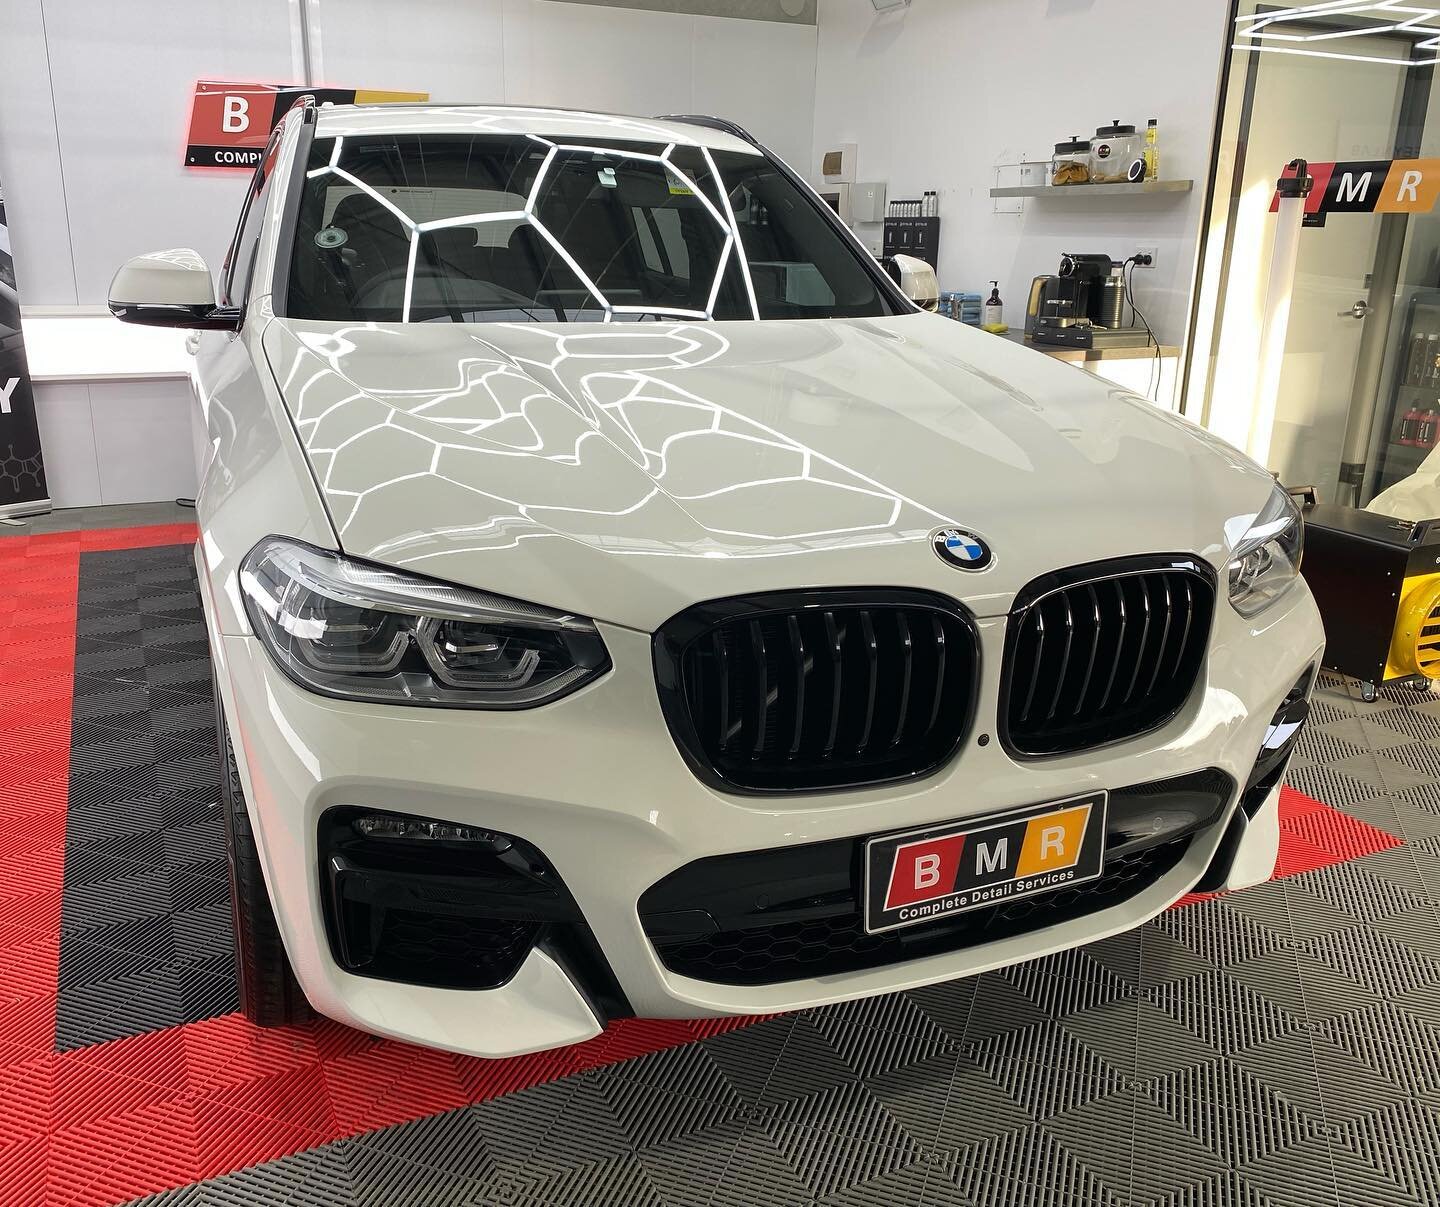 Brand new BMW X3 4.0i in for full front paint protection film. Bonnet, front bar, fenders, headlights &amp; mirrors all covered with Hexis Bodyfence self heal film. Rest of car has been sealed with Feynlab detailer until it gets some signage on the s